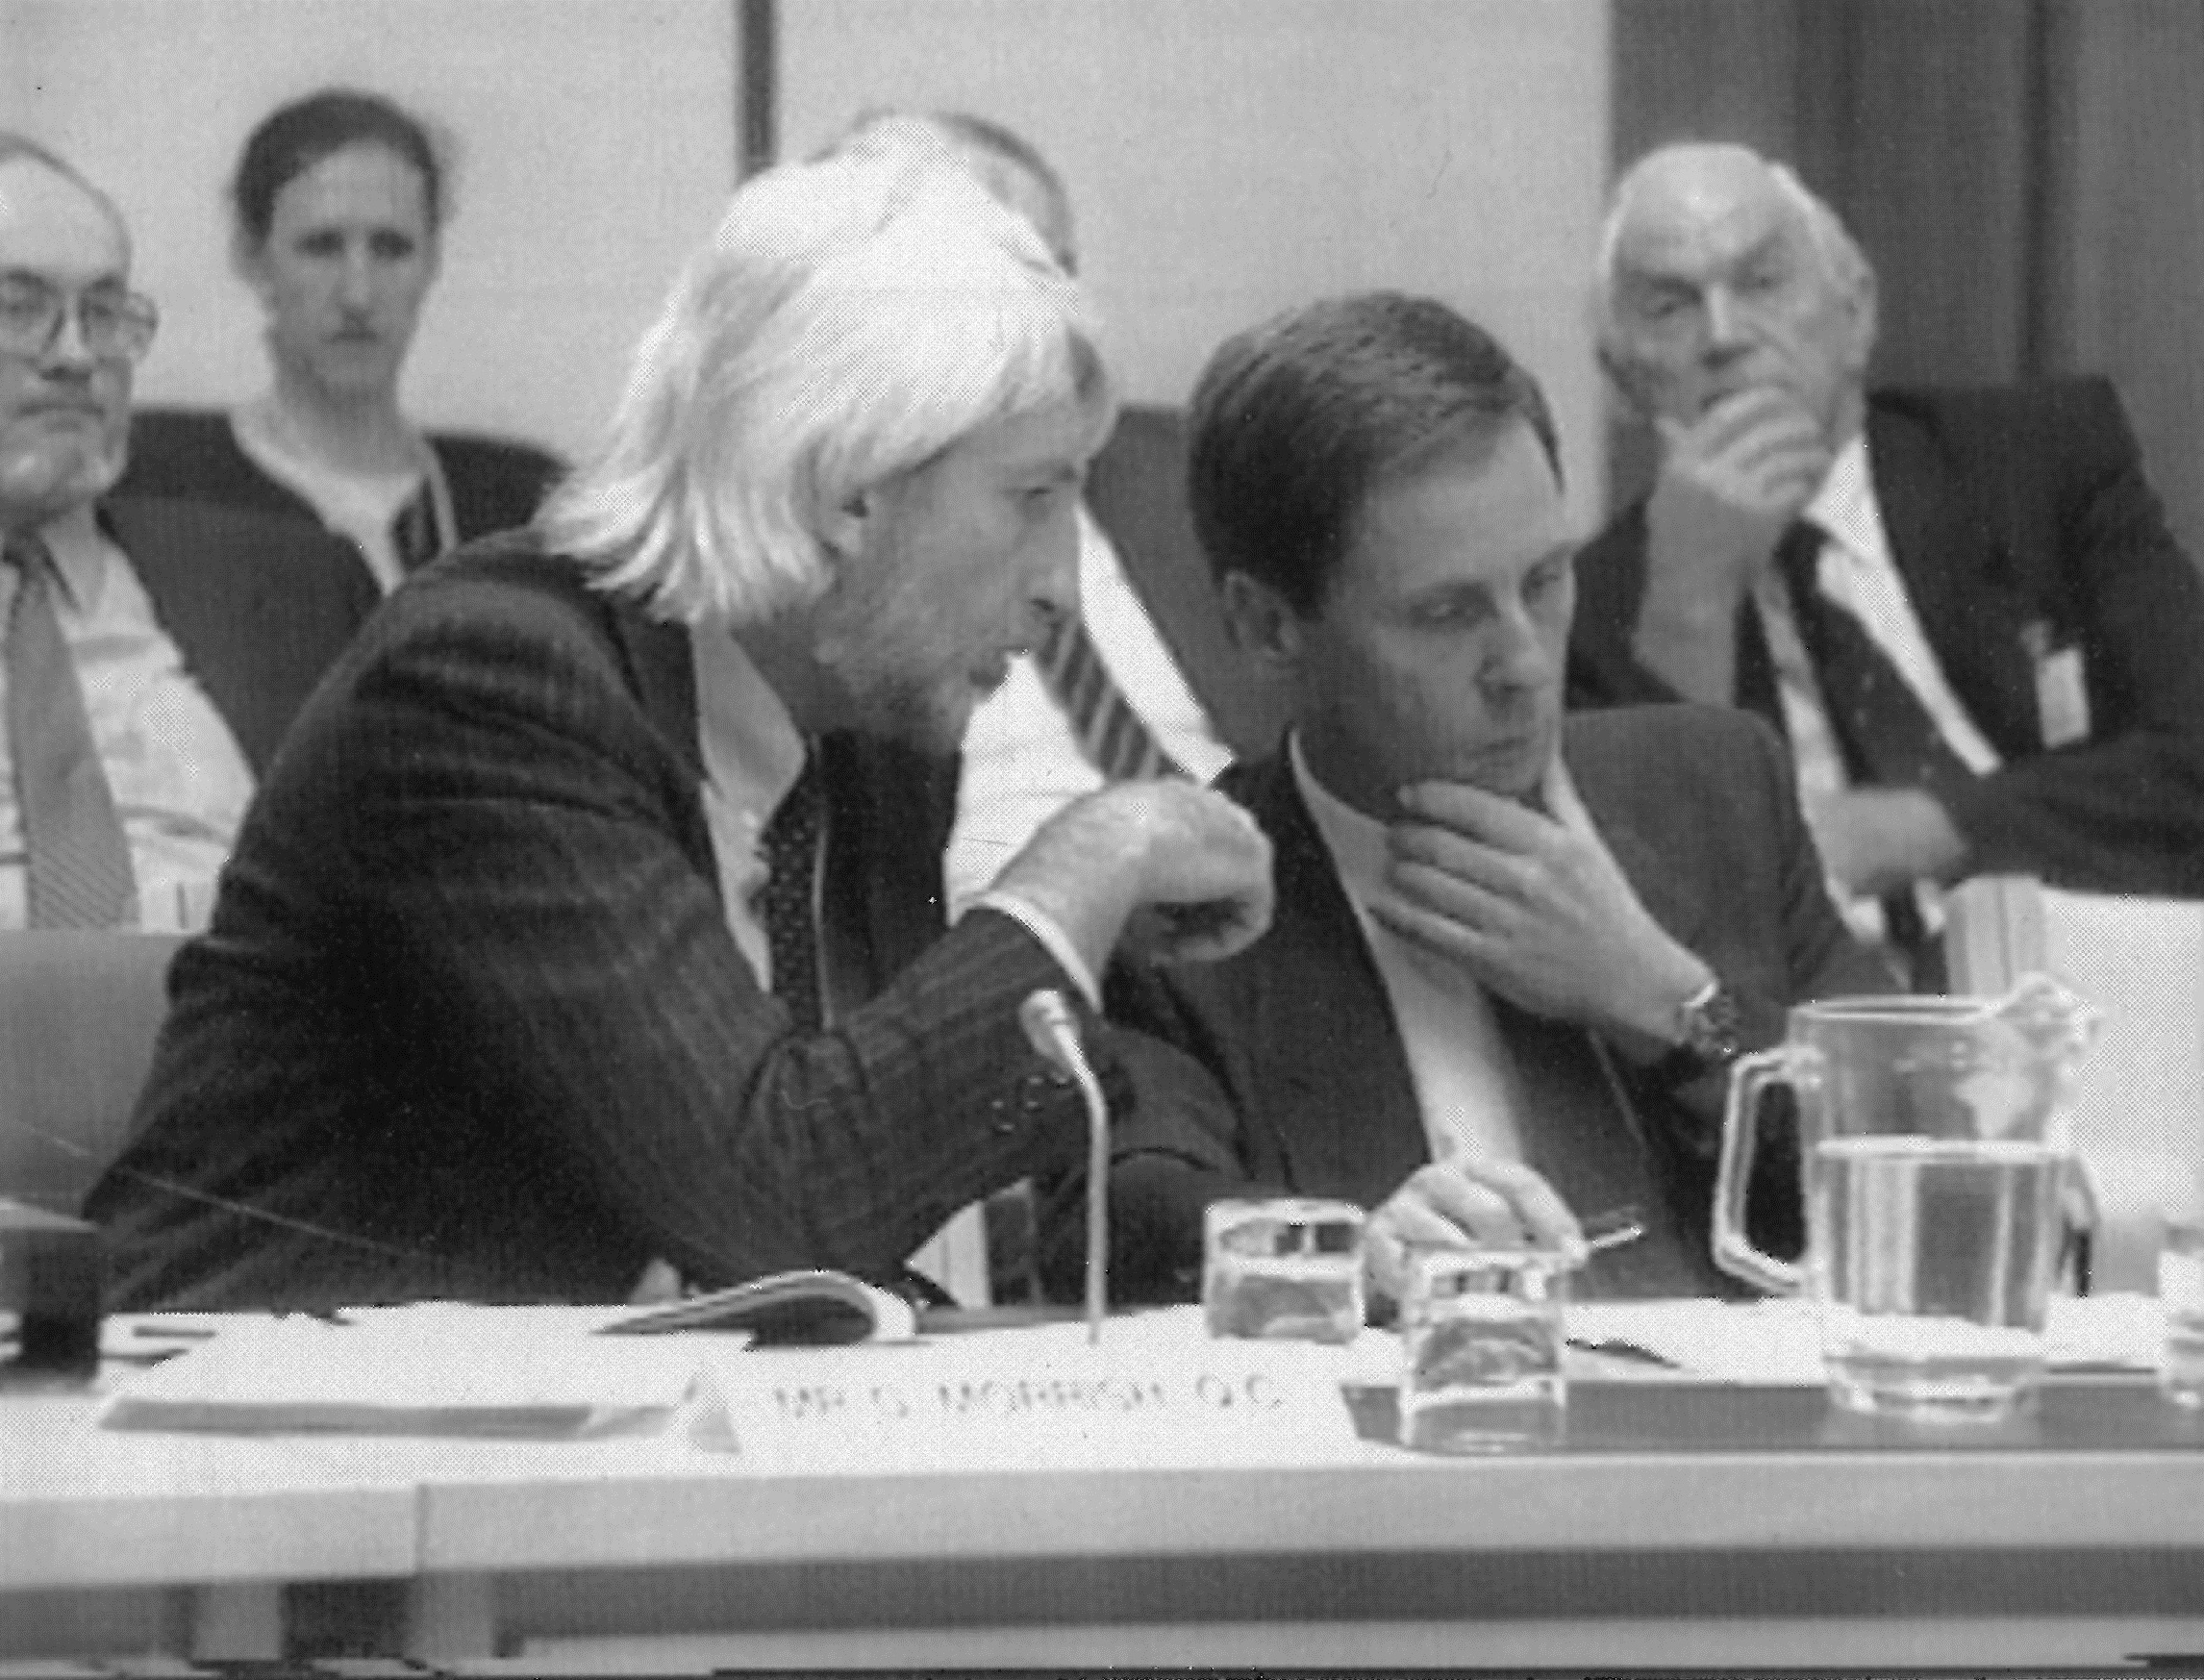 Graham Morrish QC advises Julian Leckie, a witness at the Committee of Privileges hearing, 27 April 1992. In all, seven Queen's Counsel took part in the hearing.